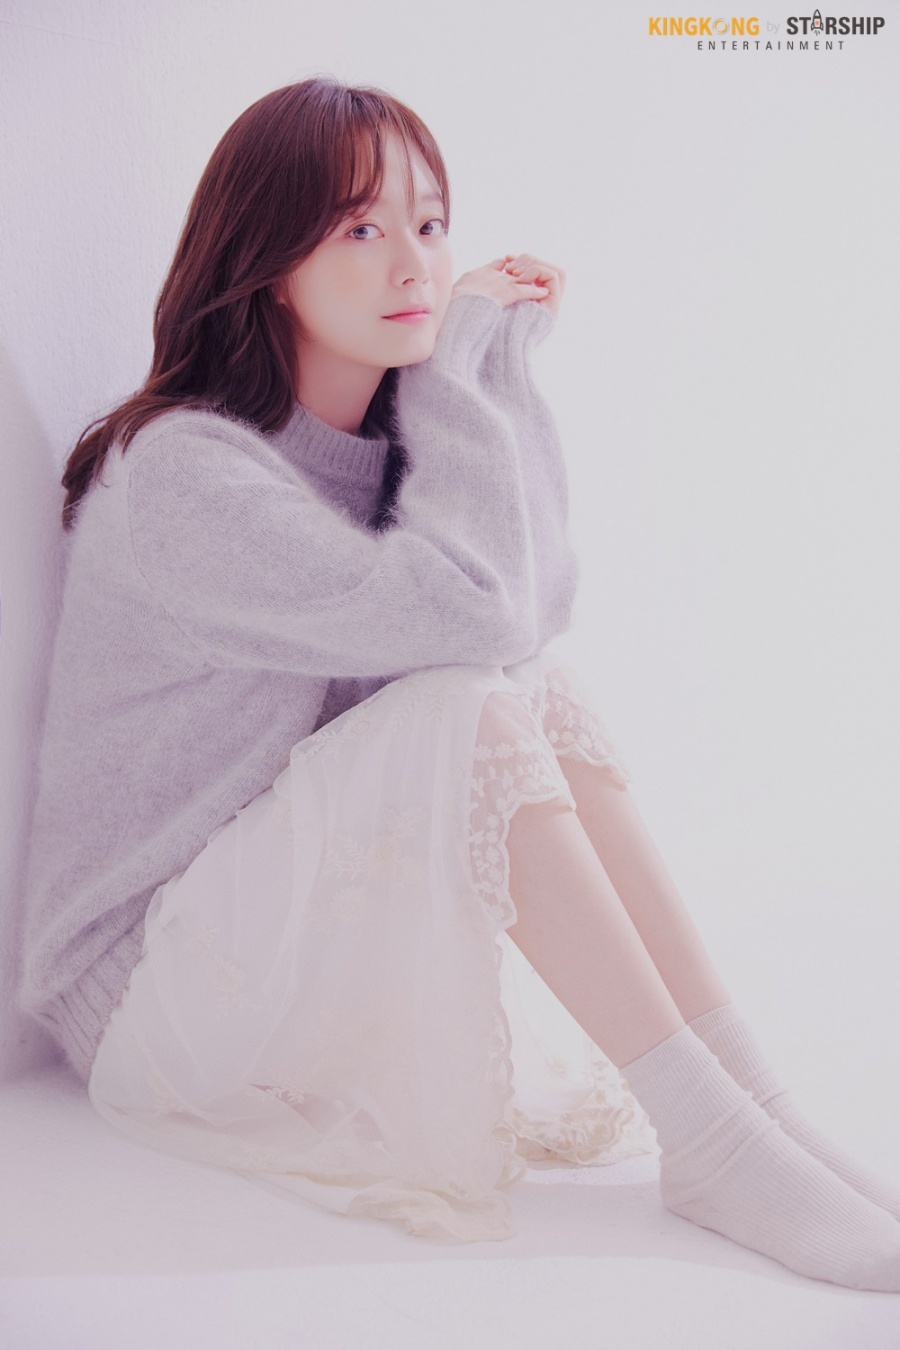 Actor Jeon So-min has released a new profile.On the 22nd, King Kong by Starship released a new profile featuring the colorful charm of Actor Jeon So-min.In the open photo, Jeon So-min is staring at the camera wearing a clean white shirt and jeans.He has a clear skin, big eyes, a slightly wet hairstyle, and a refreshing yet pure charm.In the following photos, Jeon So-min captures the attention of a luxurious atmosphere with black and white photographs wearing black neat.He also showed off a lovely visual, matching pastel-toned warm neat and lace skirts.Jeon So-min has been active in crossing the screen with Brown.He not only digested his unique bright and positive characters, but also received a lot of love from the public with his friendly Image through entertainment programs.Meanwhile, Jeon So-min is appearing on SBS Running Man and is reviewing his next film.=